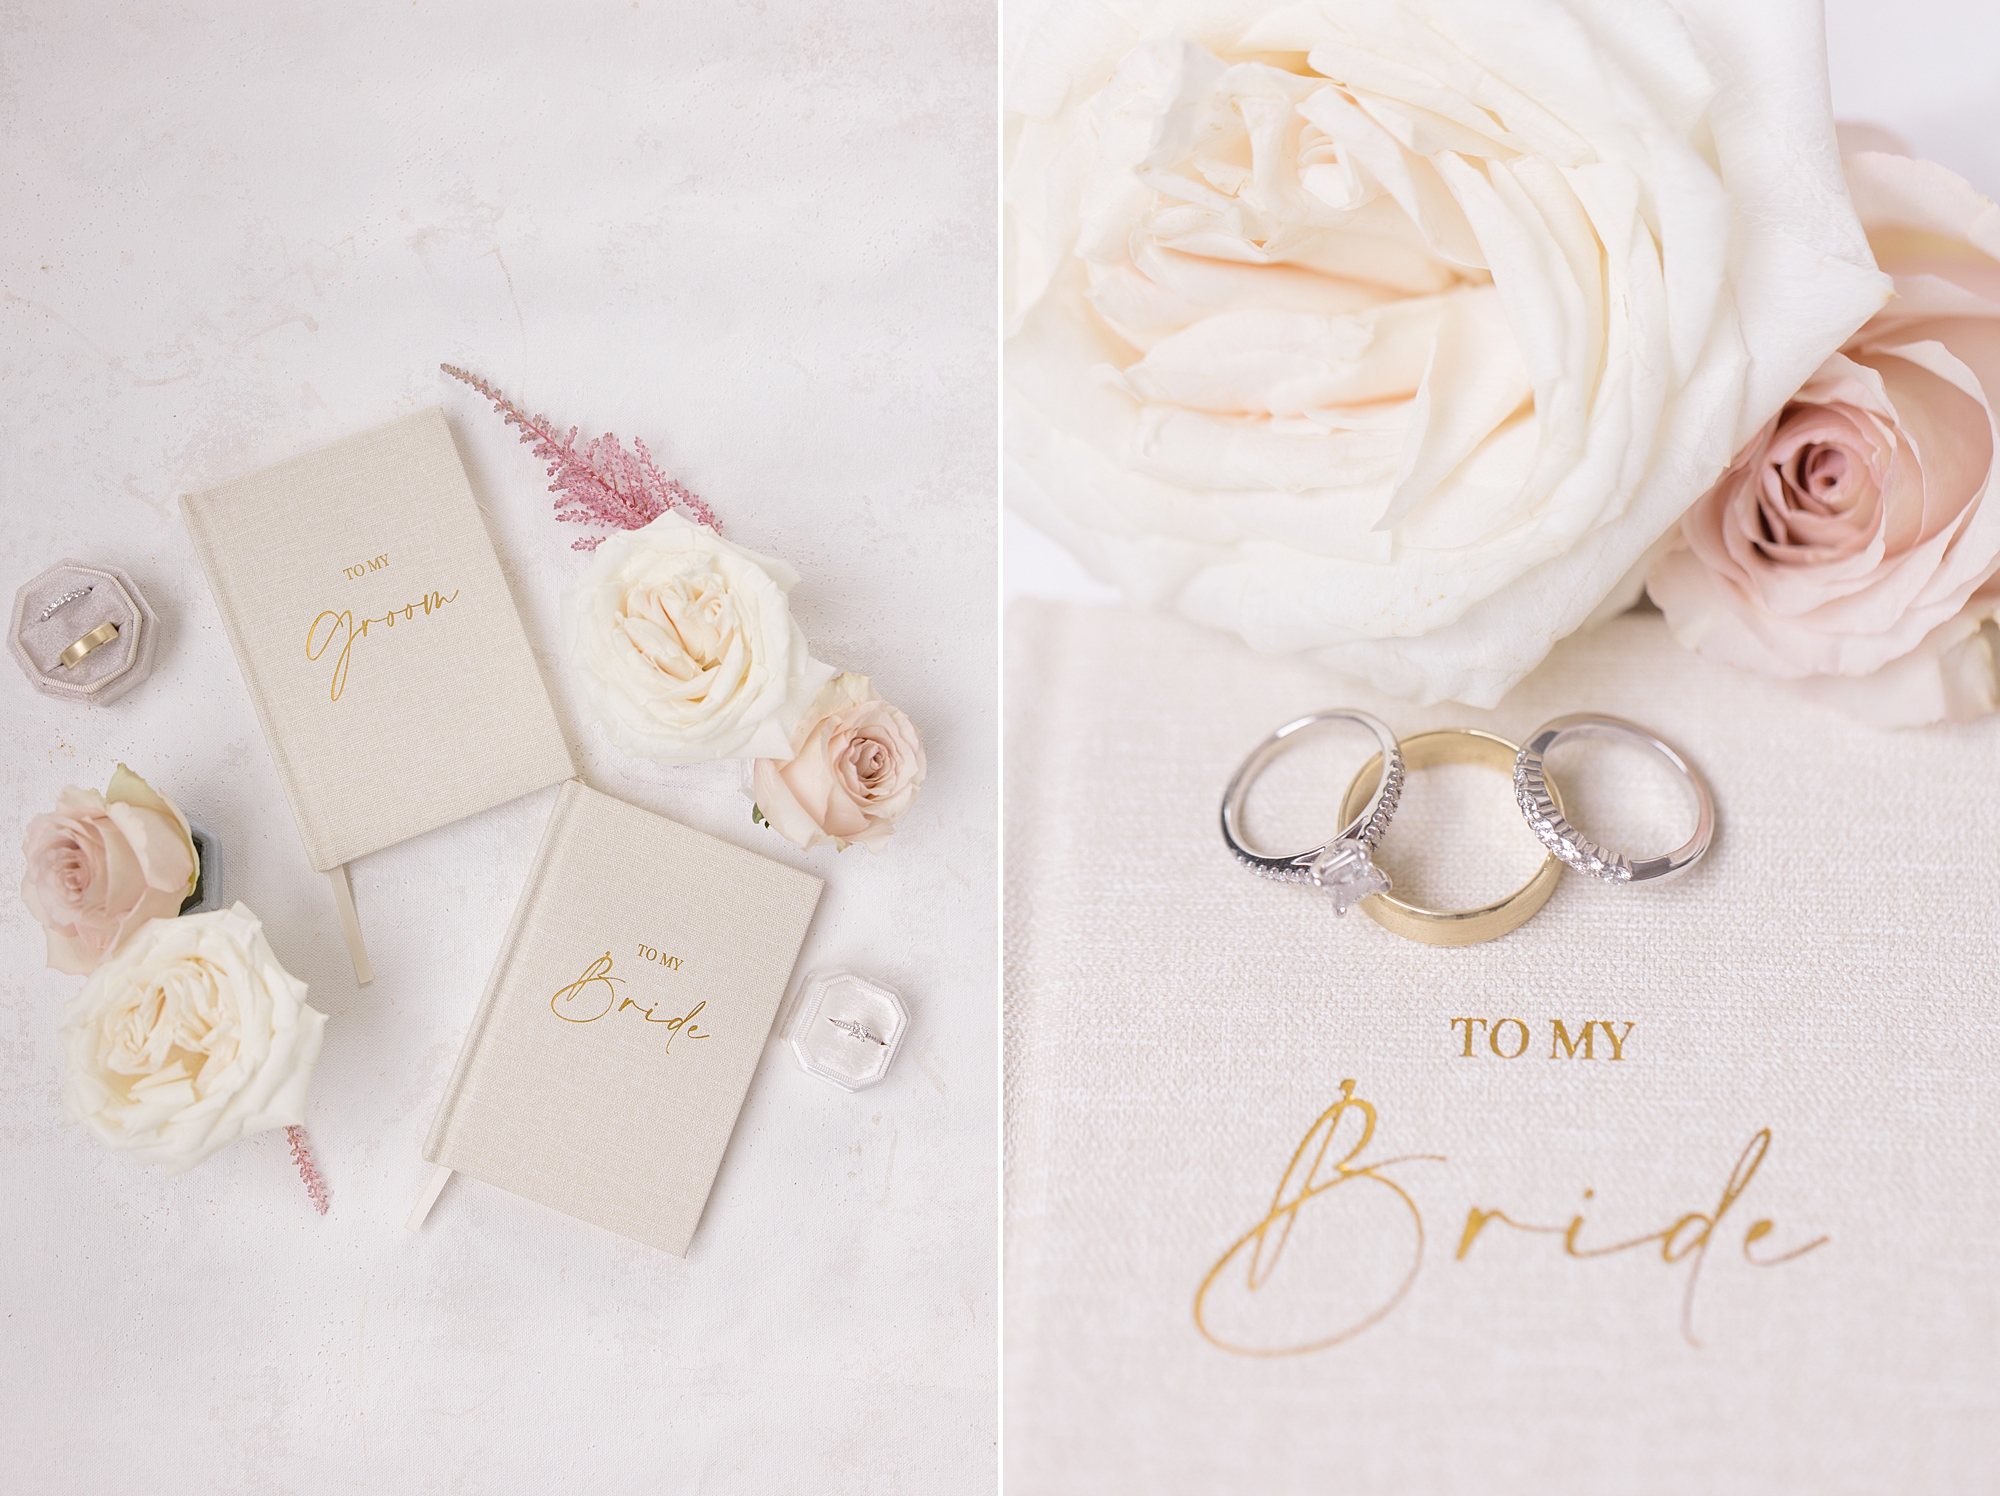 vow booklet and wedding bands near ivory rose 